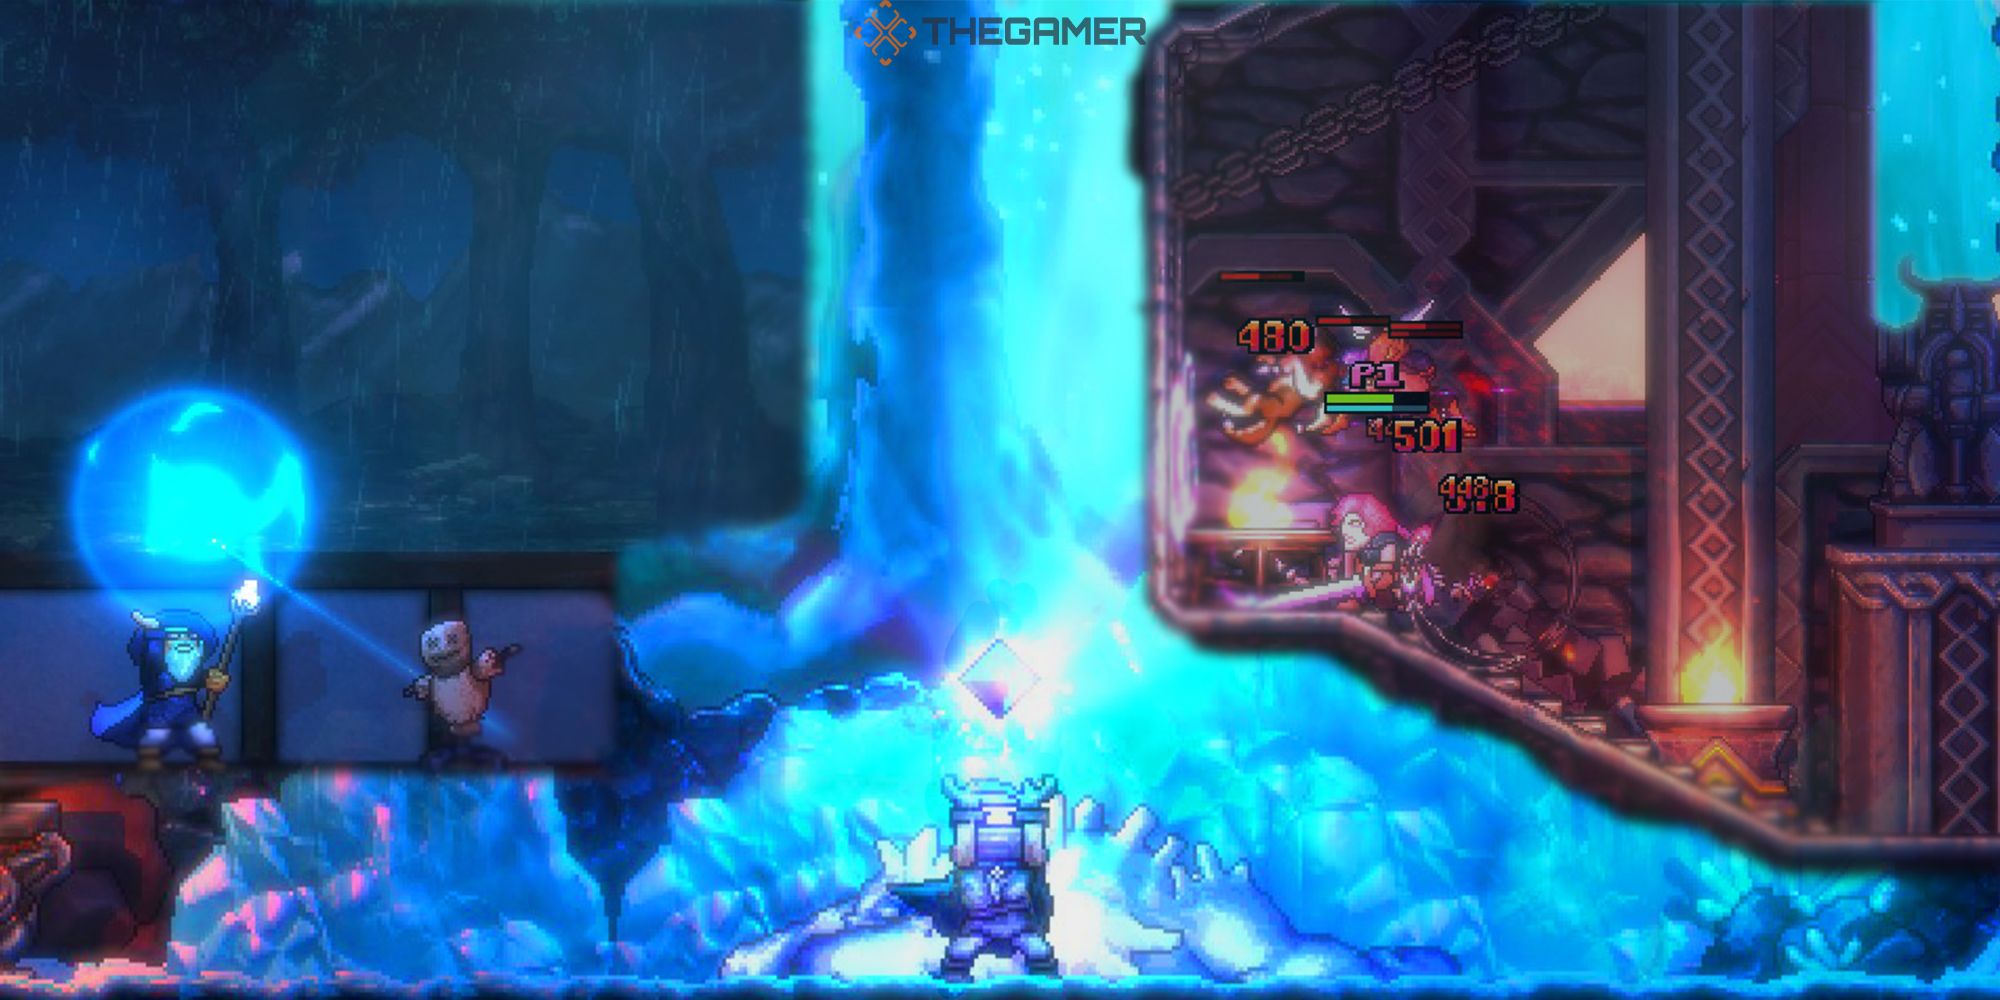 A fusion of Bravery And Greed screenshots featuring The Wizard crafting an Energy Ball in the Training Room,  The Rogue holding a rune in the Ice Caves, and The Warrior fighting off Hordes of monsters.